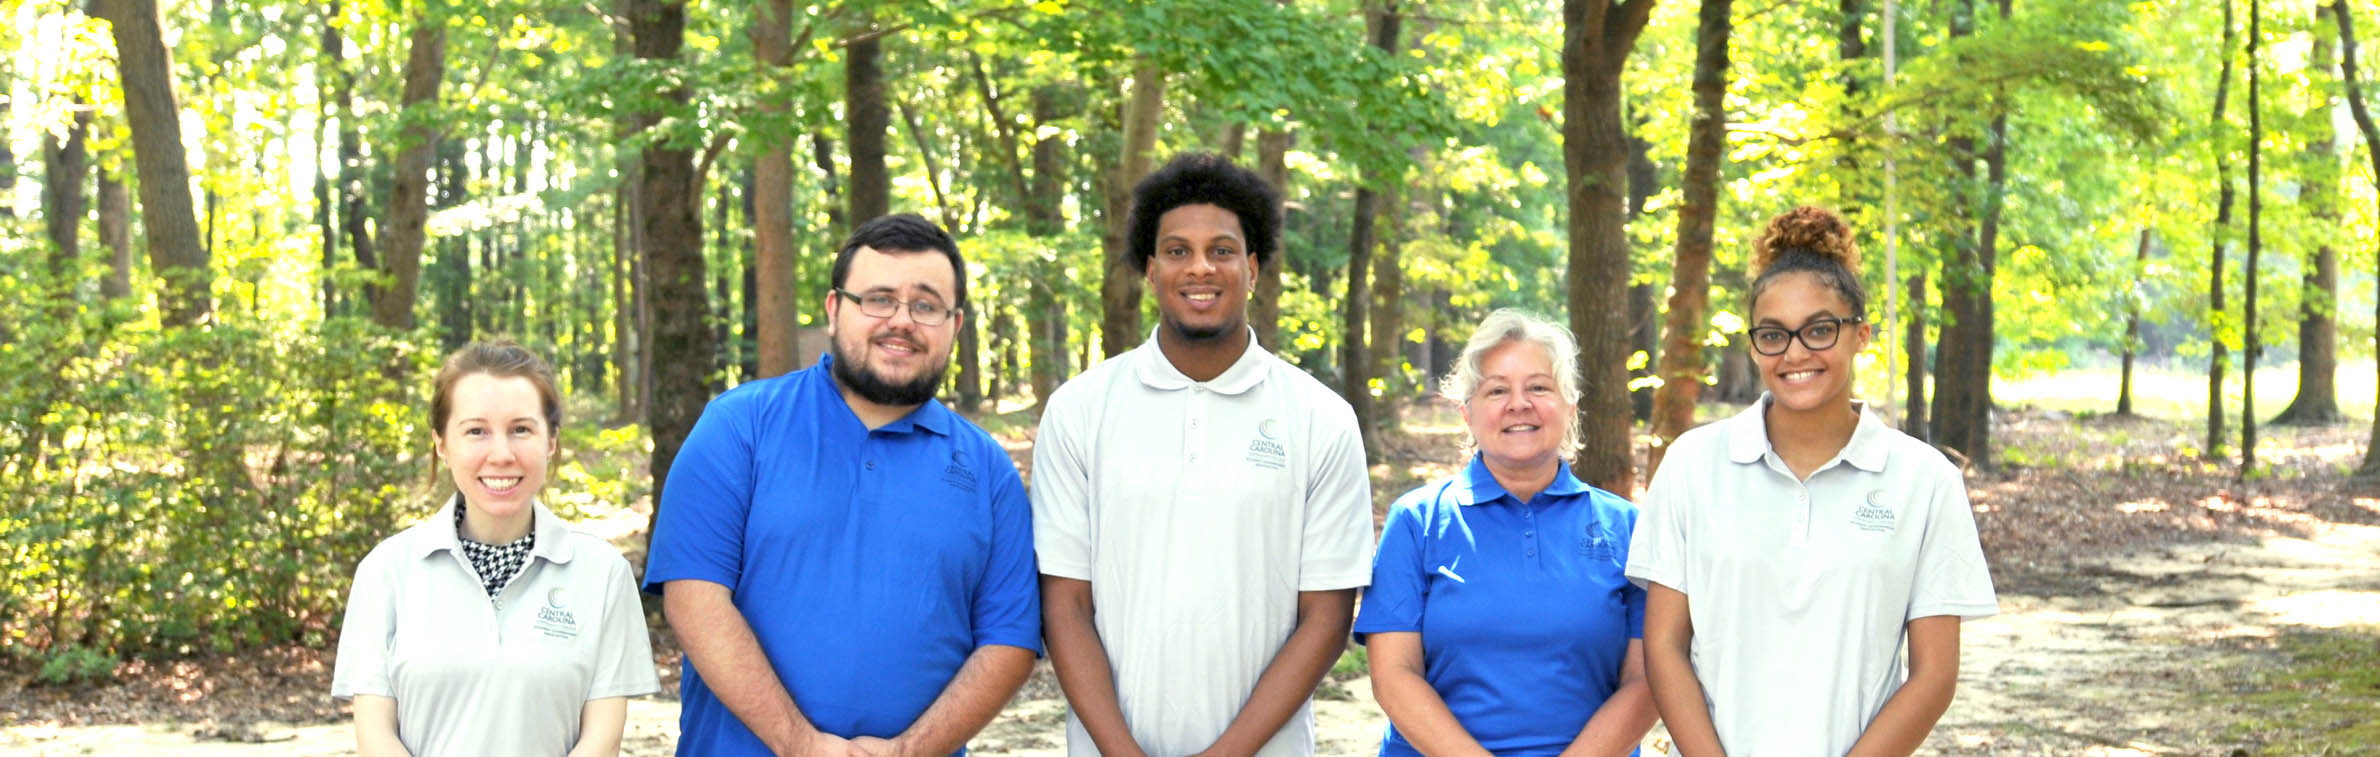 Click to enlarge,  The Central Carolina Community College Student Government Association officers for 2018-2019 are, left to right: Diana Mattson of Sanford, Treasurer; Dylan Hargis of Angier, President; Keyon Jones of Spring Lake, Vice President for Lee County; Stephanie Sellers of Cameron, Secretary; and Leah Laney of Erwin, Vice President for Harnett County. 